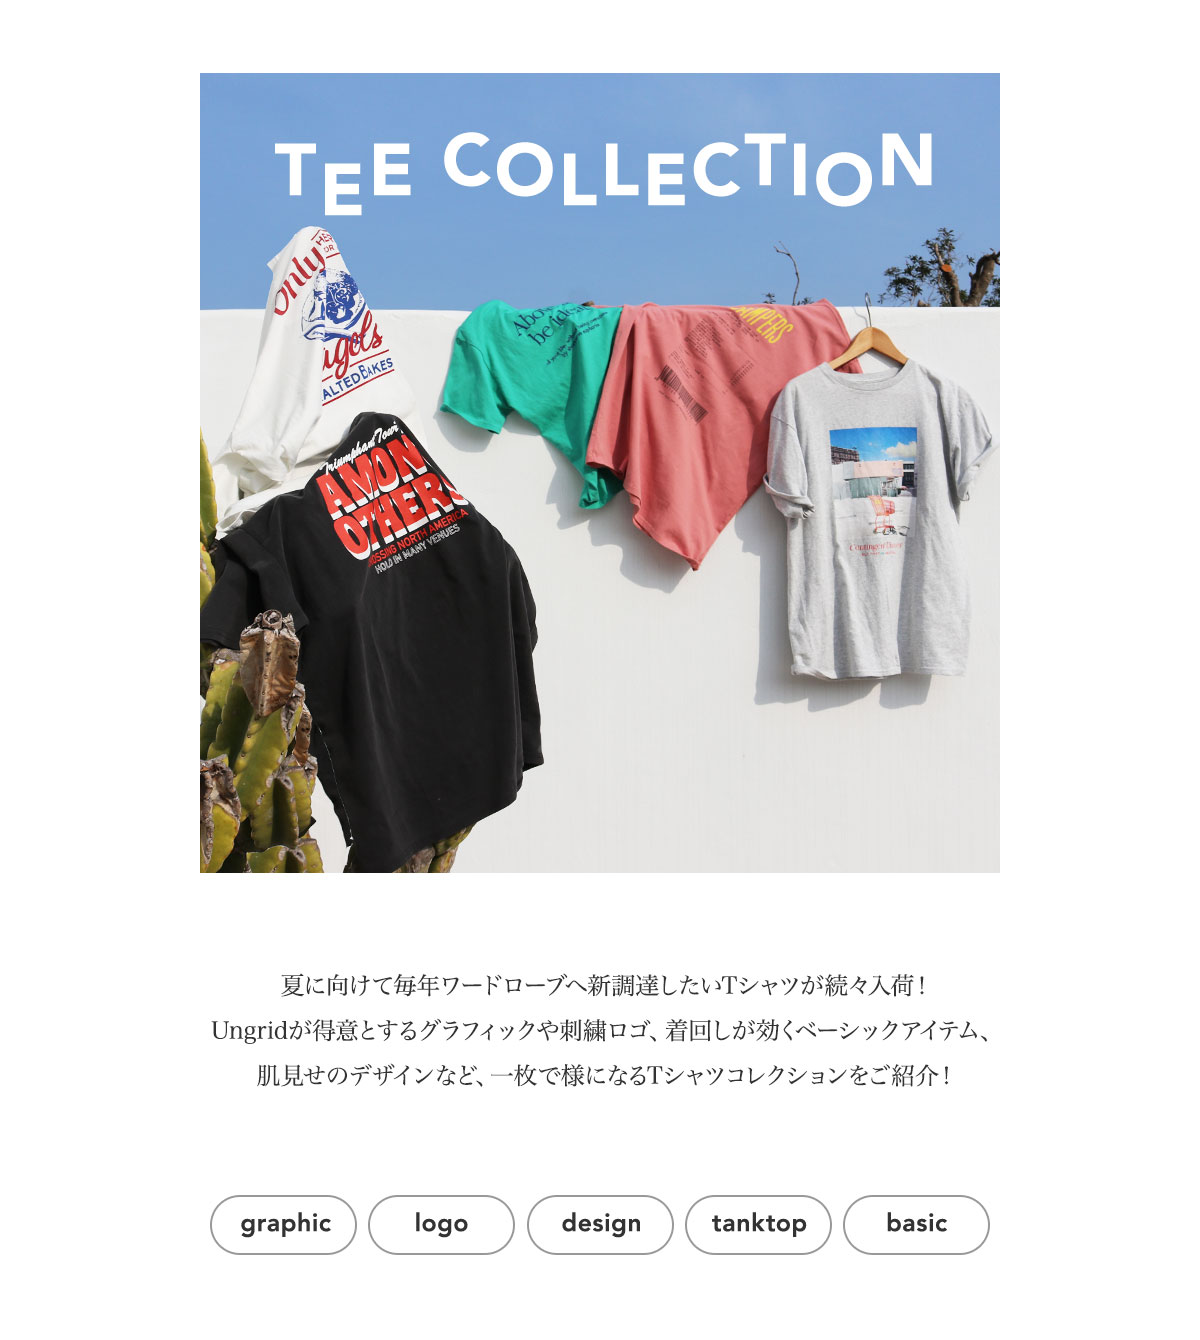 Tee Collection